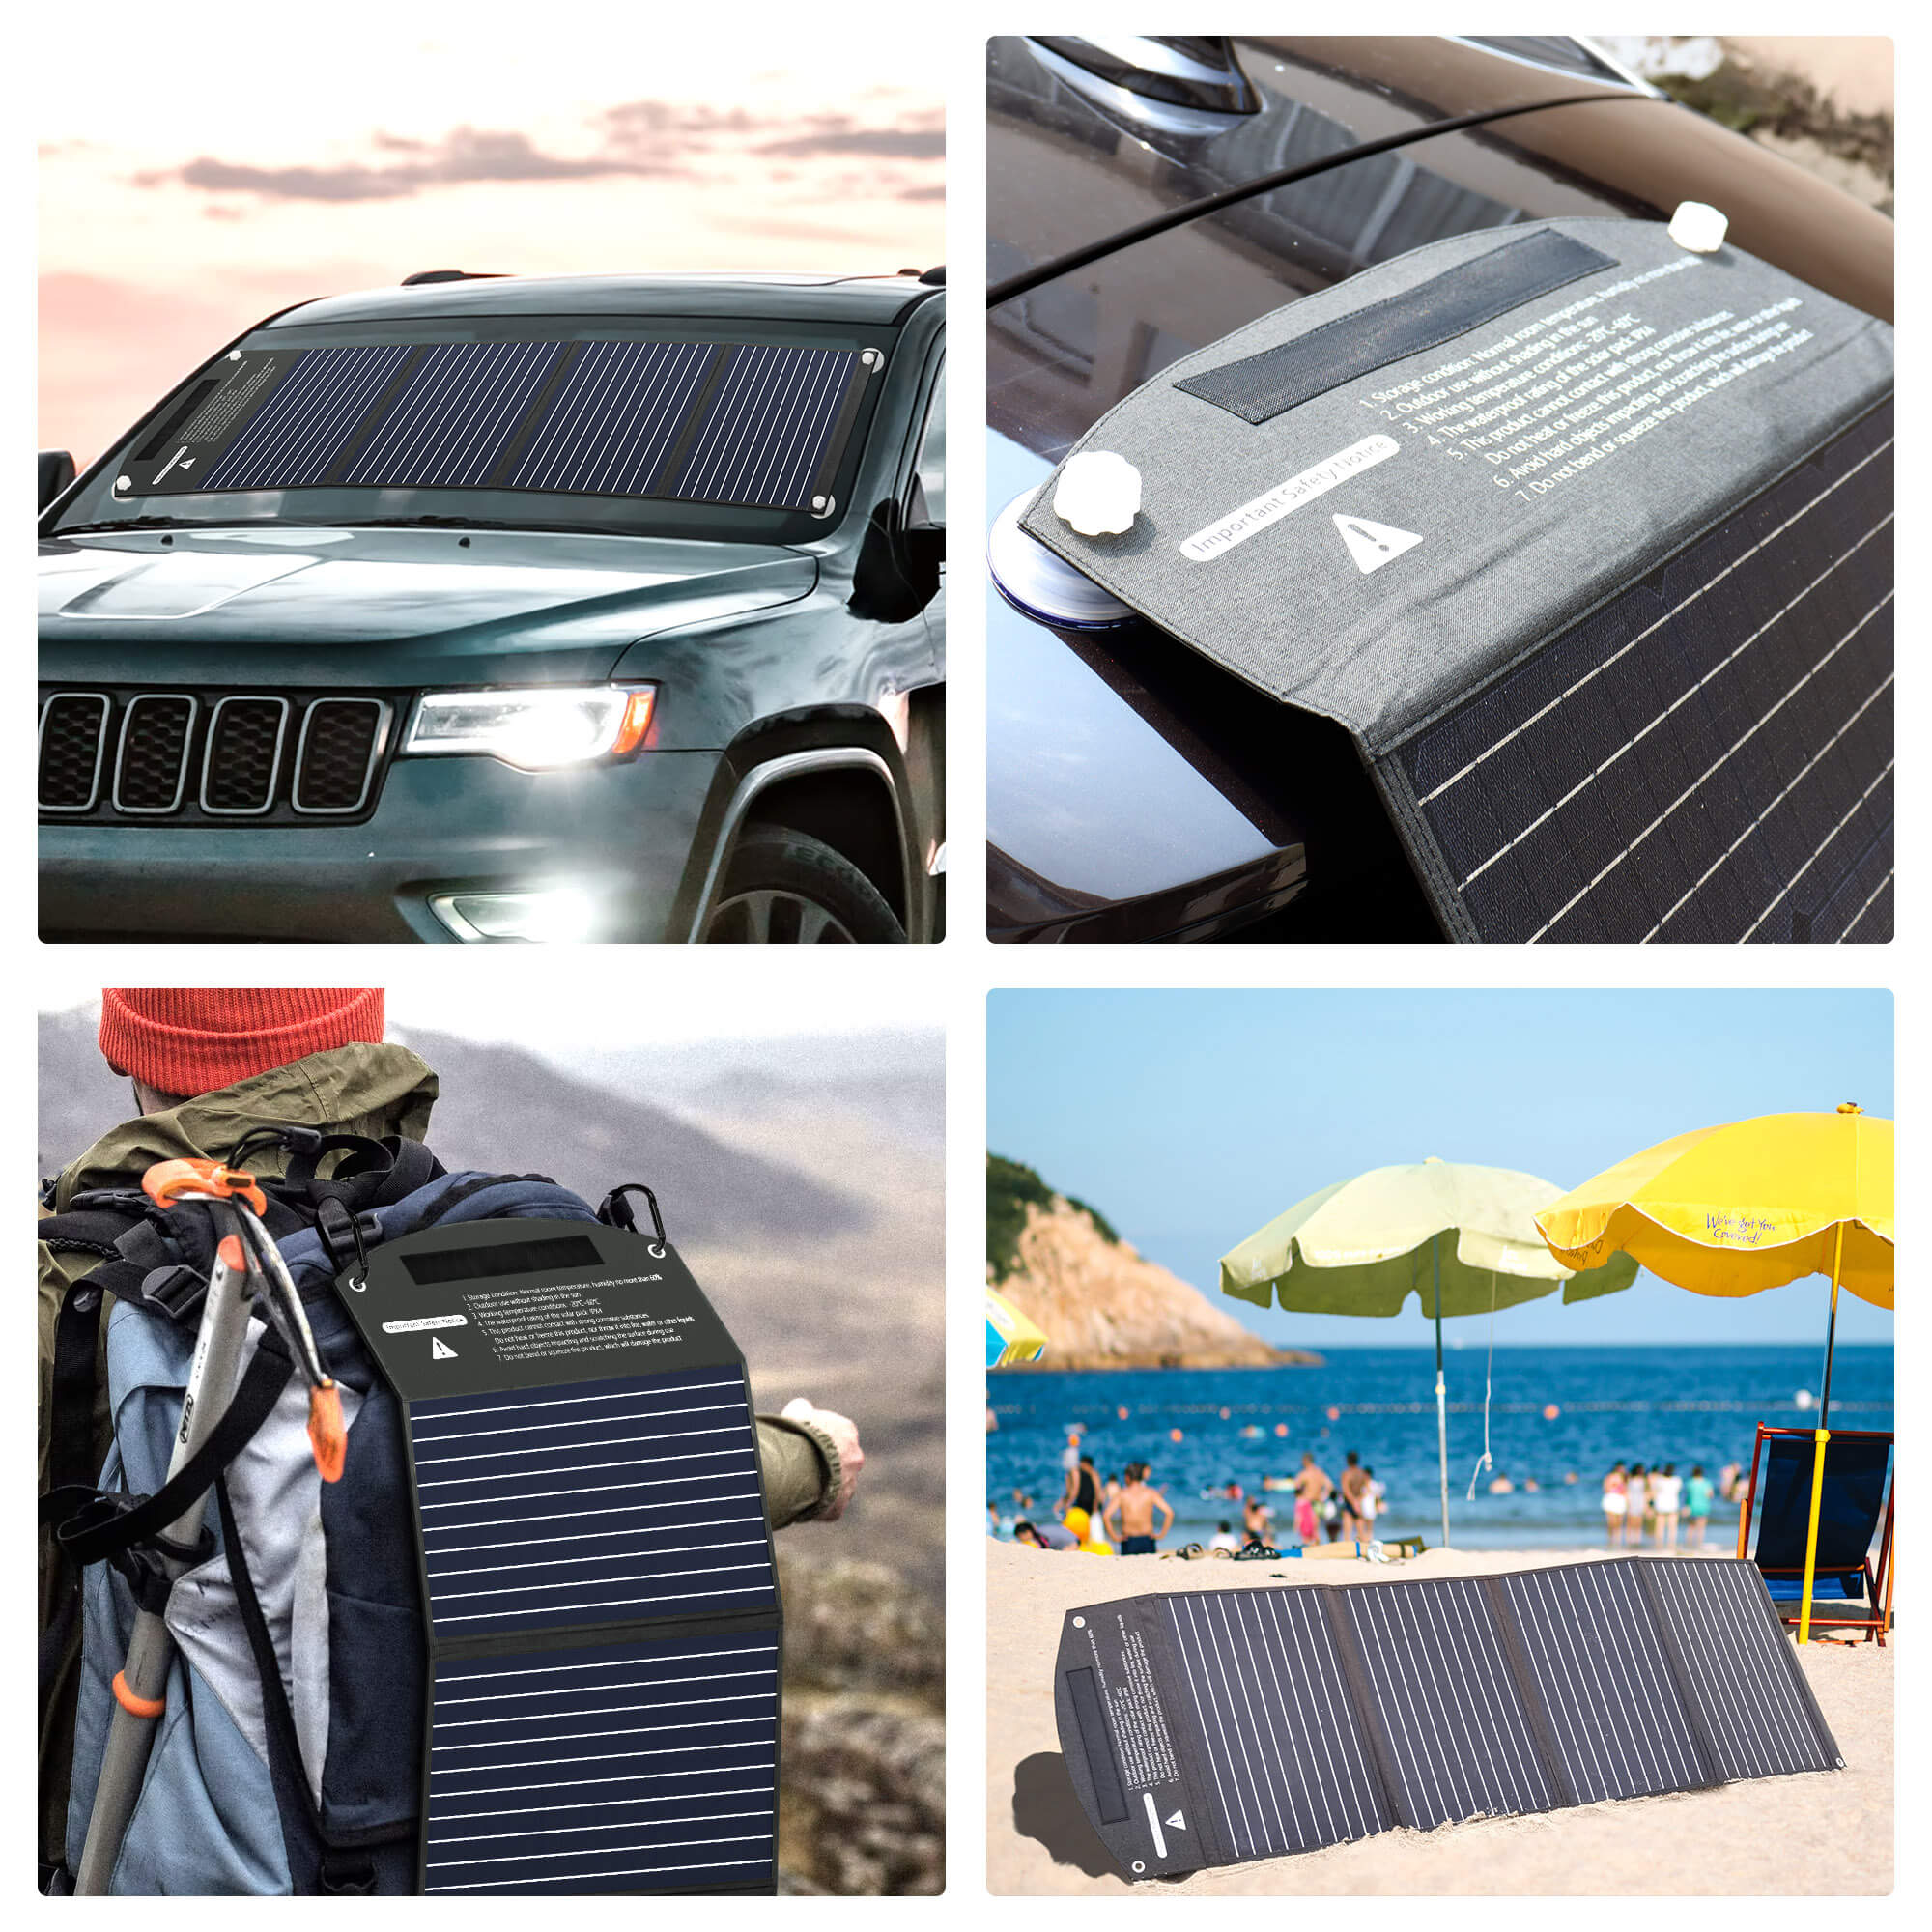 ITEHIL Solar Panel with Suction Cups